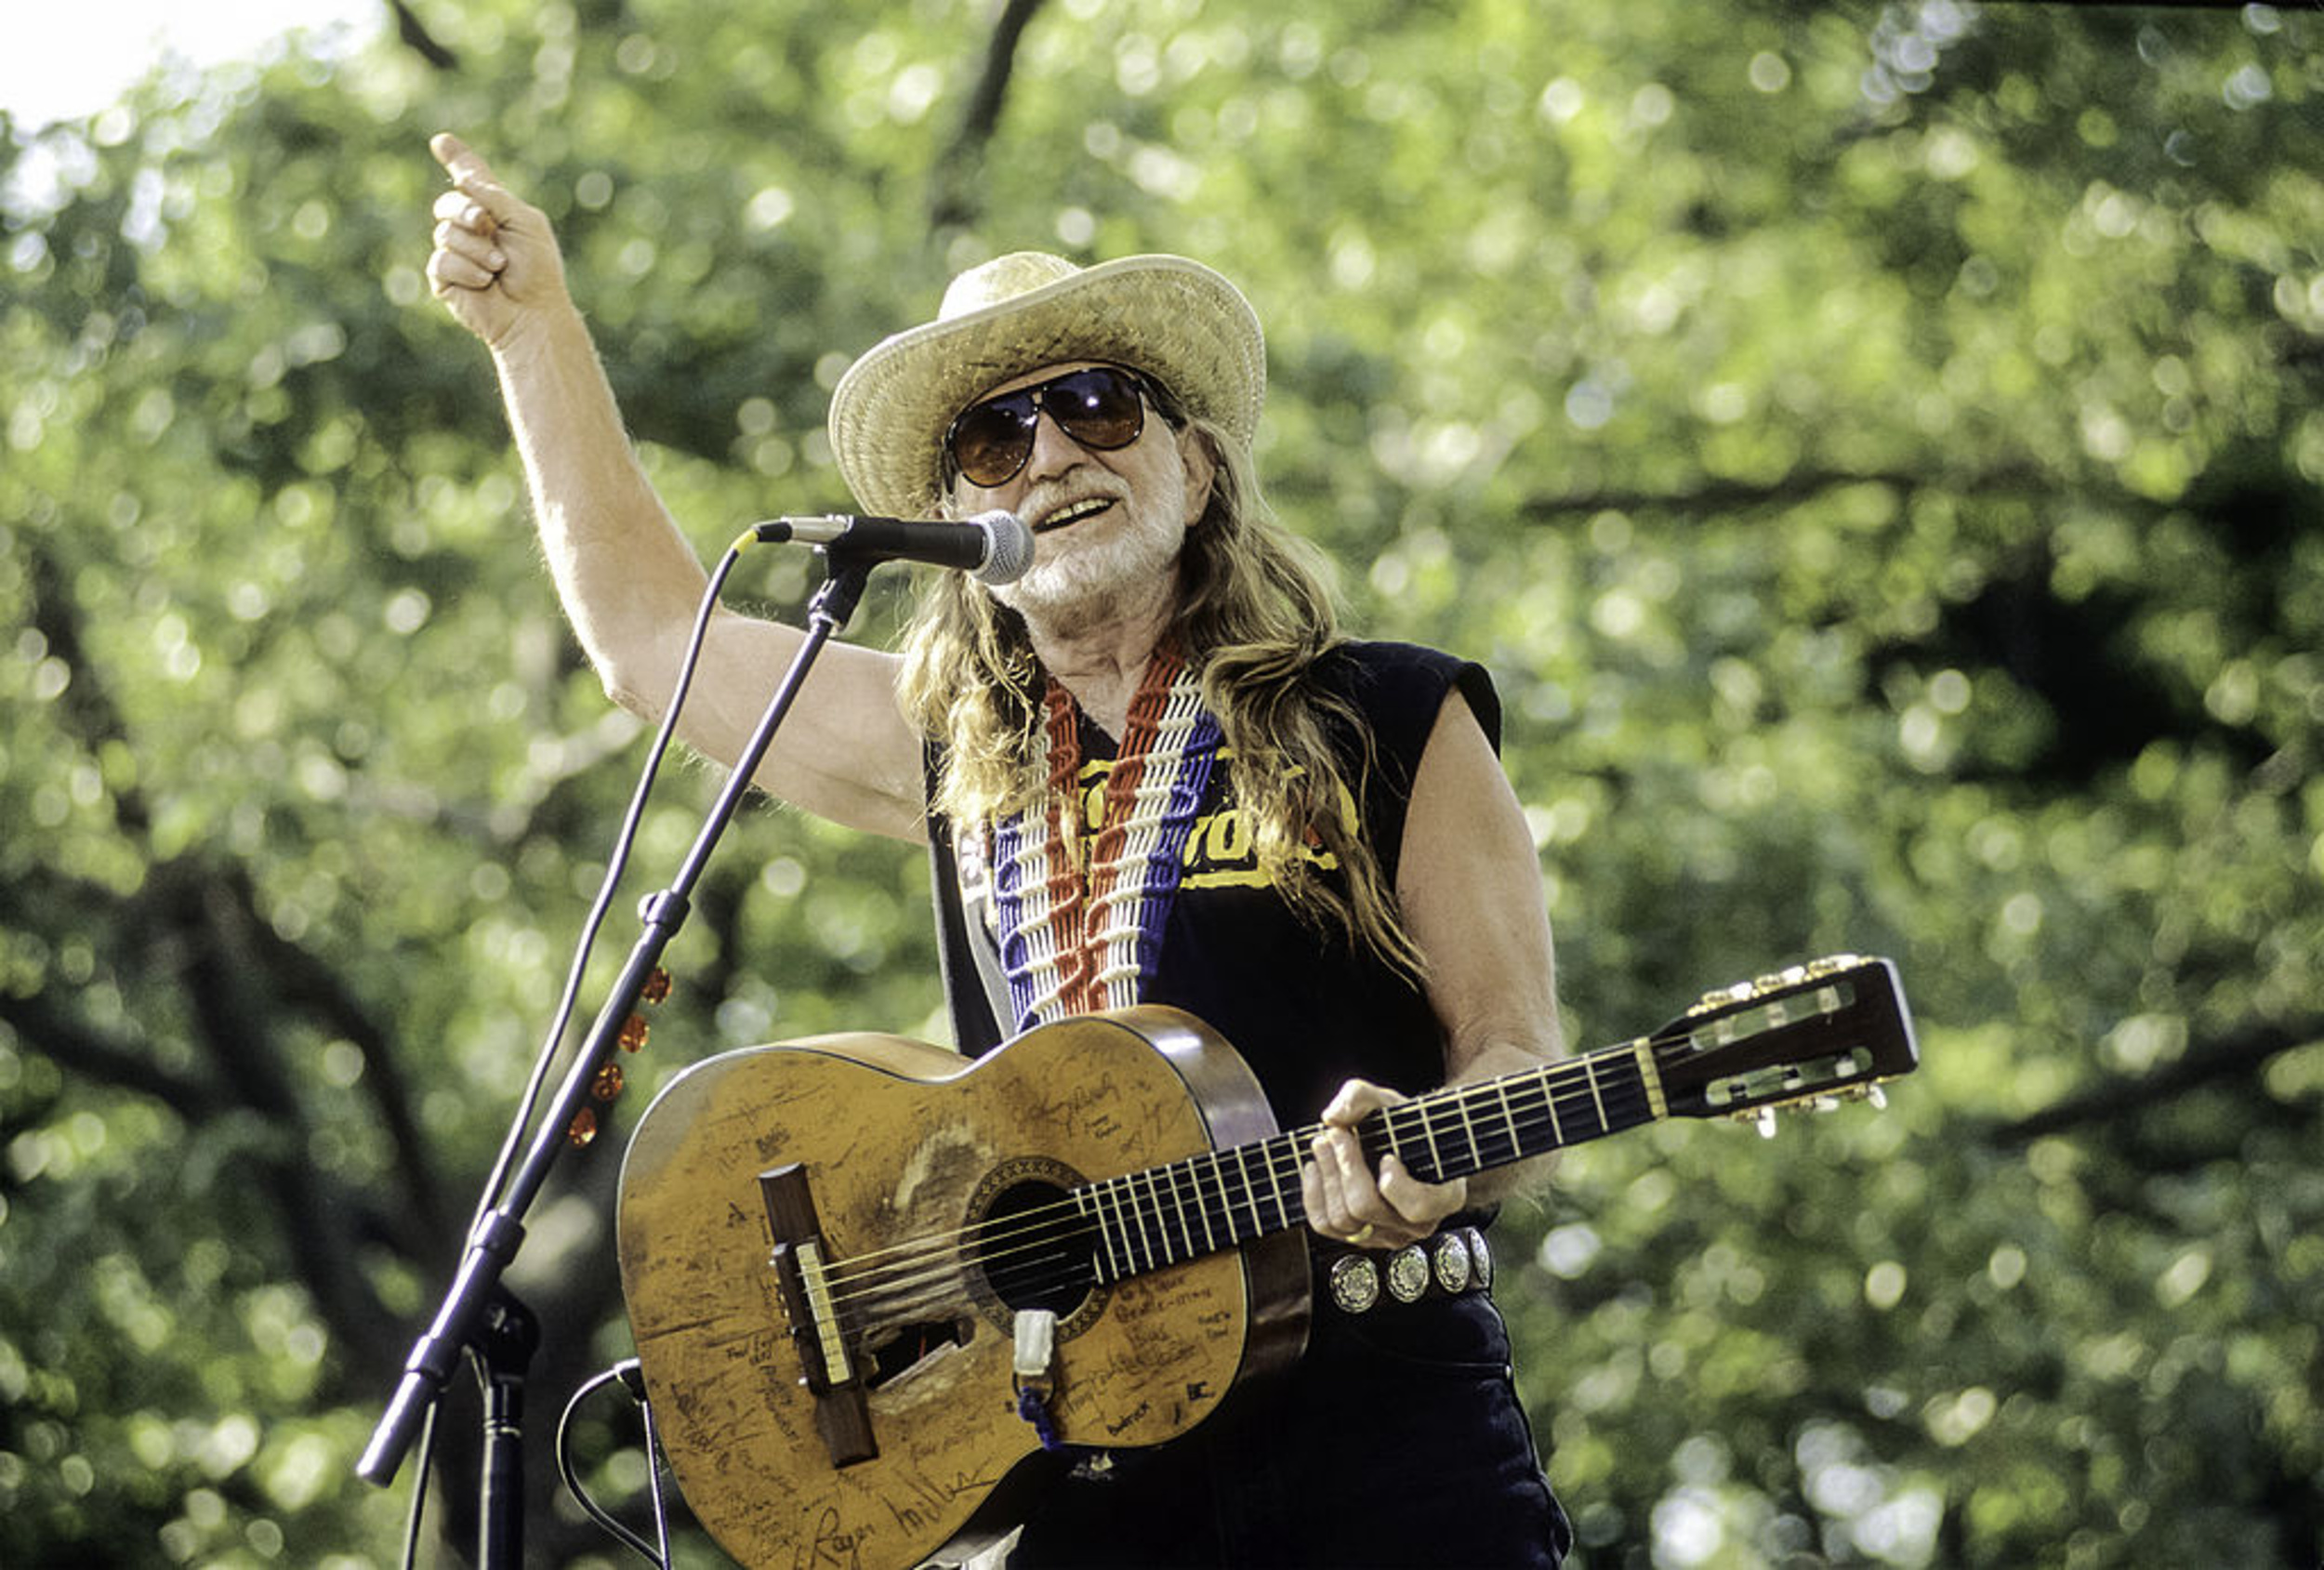 <p>No road trip would be complete without Willie Nelson's 1980 classic "On The Road Again," perfect for when you're traveling with a big group of friends for a weekend getaway. </p><p>You may also like: <a href='https://www.yardbarker.com/entertainment/articles/the_20_best_action_movies_led_by_women_111623/s1__38969731'>The 20 best action movies led by women</a></p>